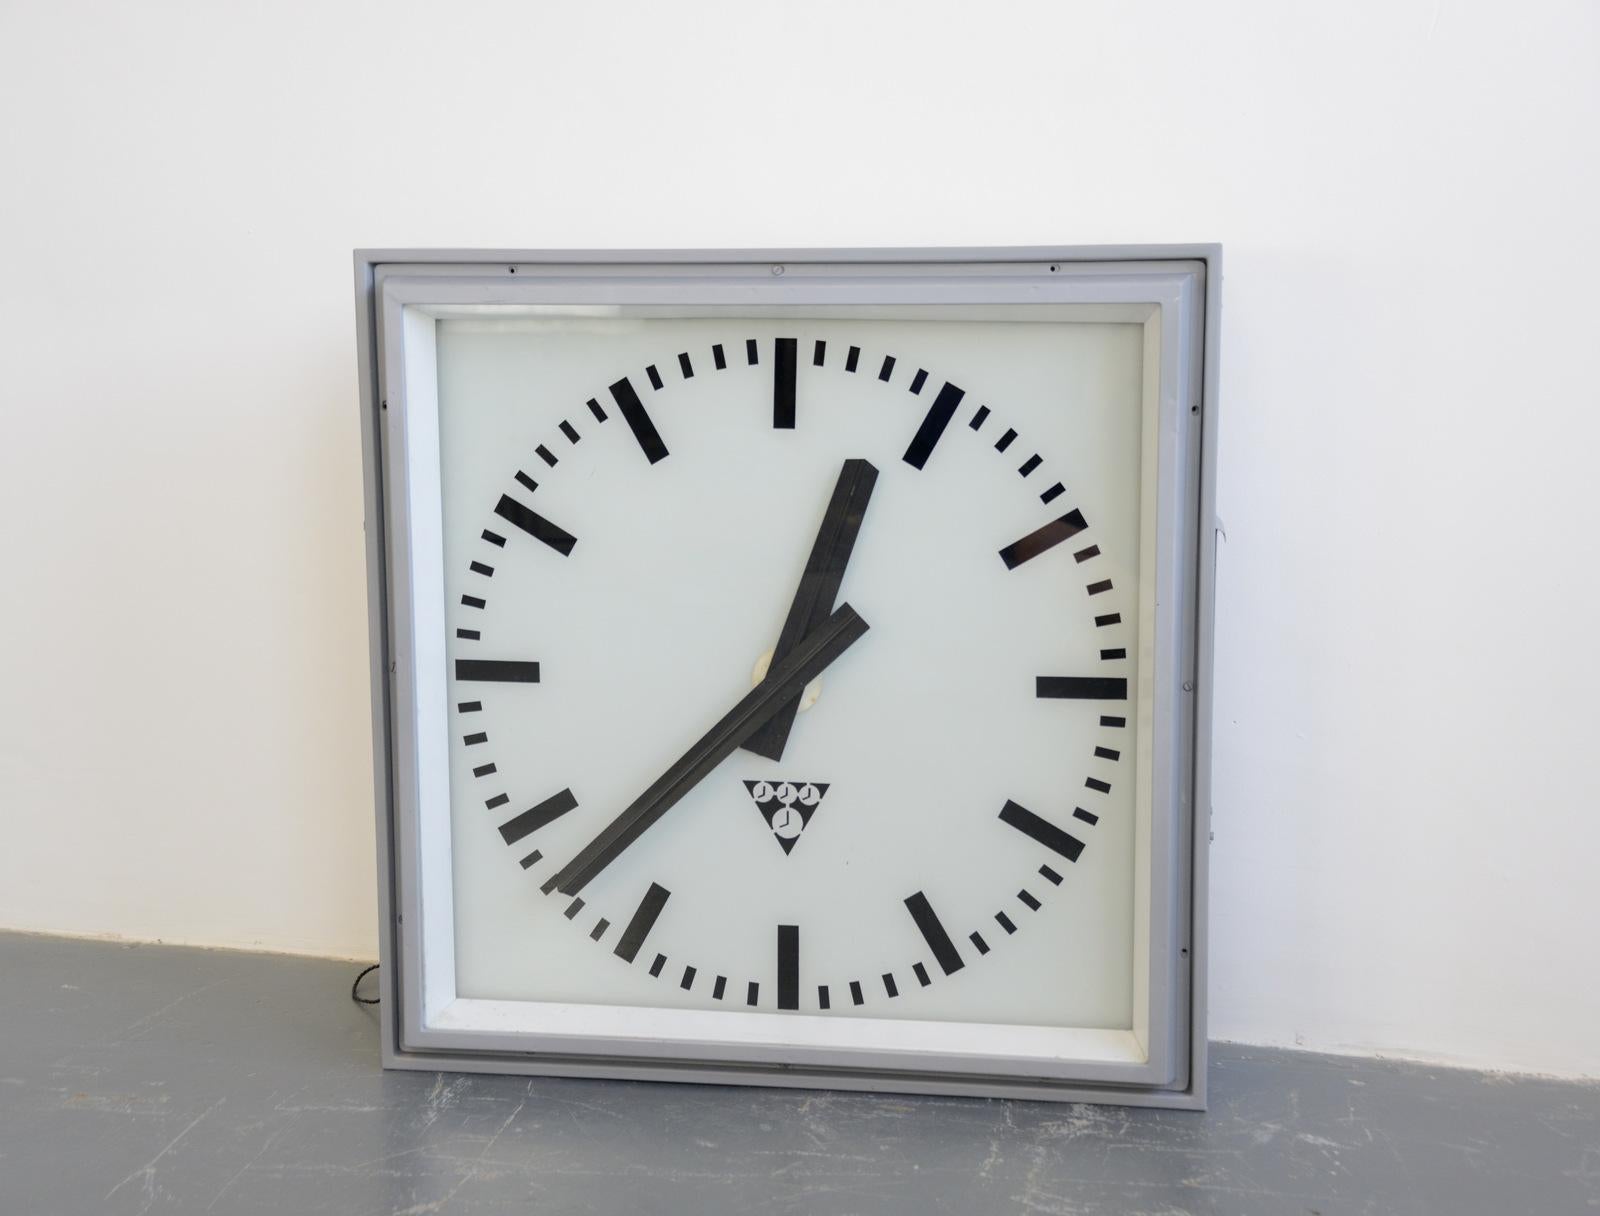 Extra large light up station clock by Pragotron, circa 1950s

- Glass face and dial
- Steel casing
- Takes 4x E27 fitting bulbs
- New AA battery powered quartz motor
- Czech, 1950s
- Measures: 96cm wide x 96cm wide x 22cm